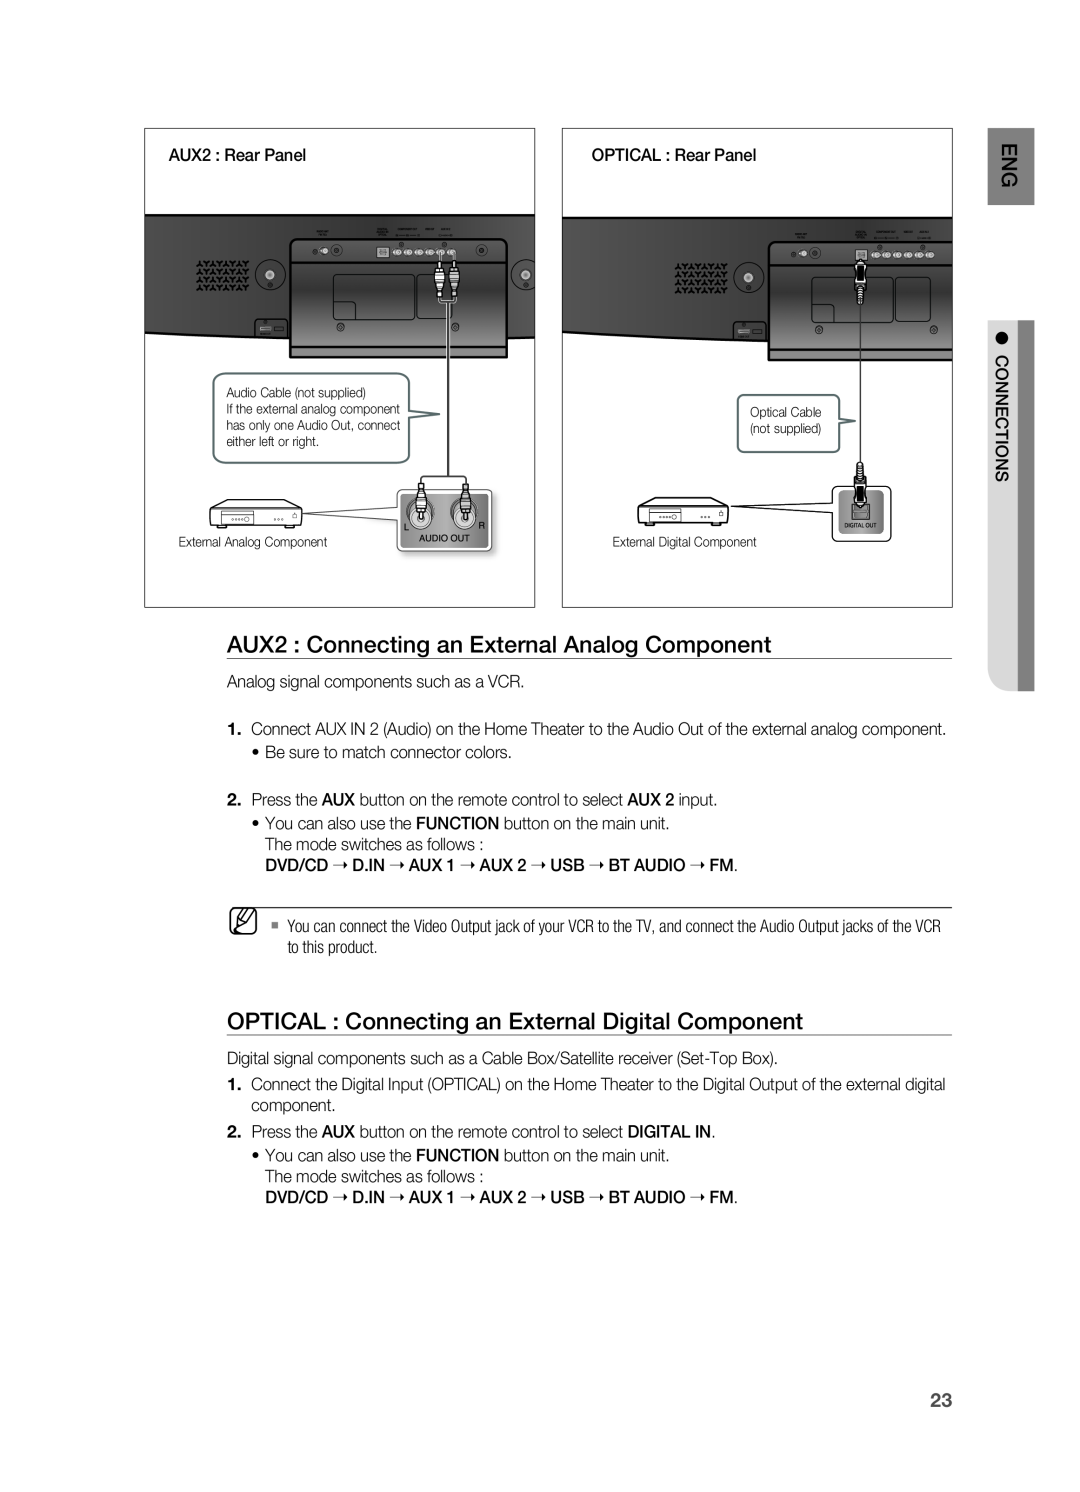 Samsung HT-X810 user manual AUX2 Connecting an External Analog Component 